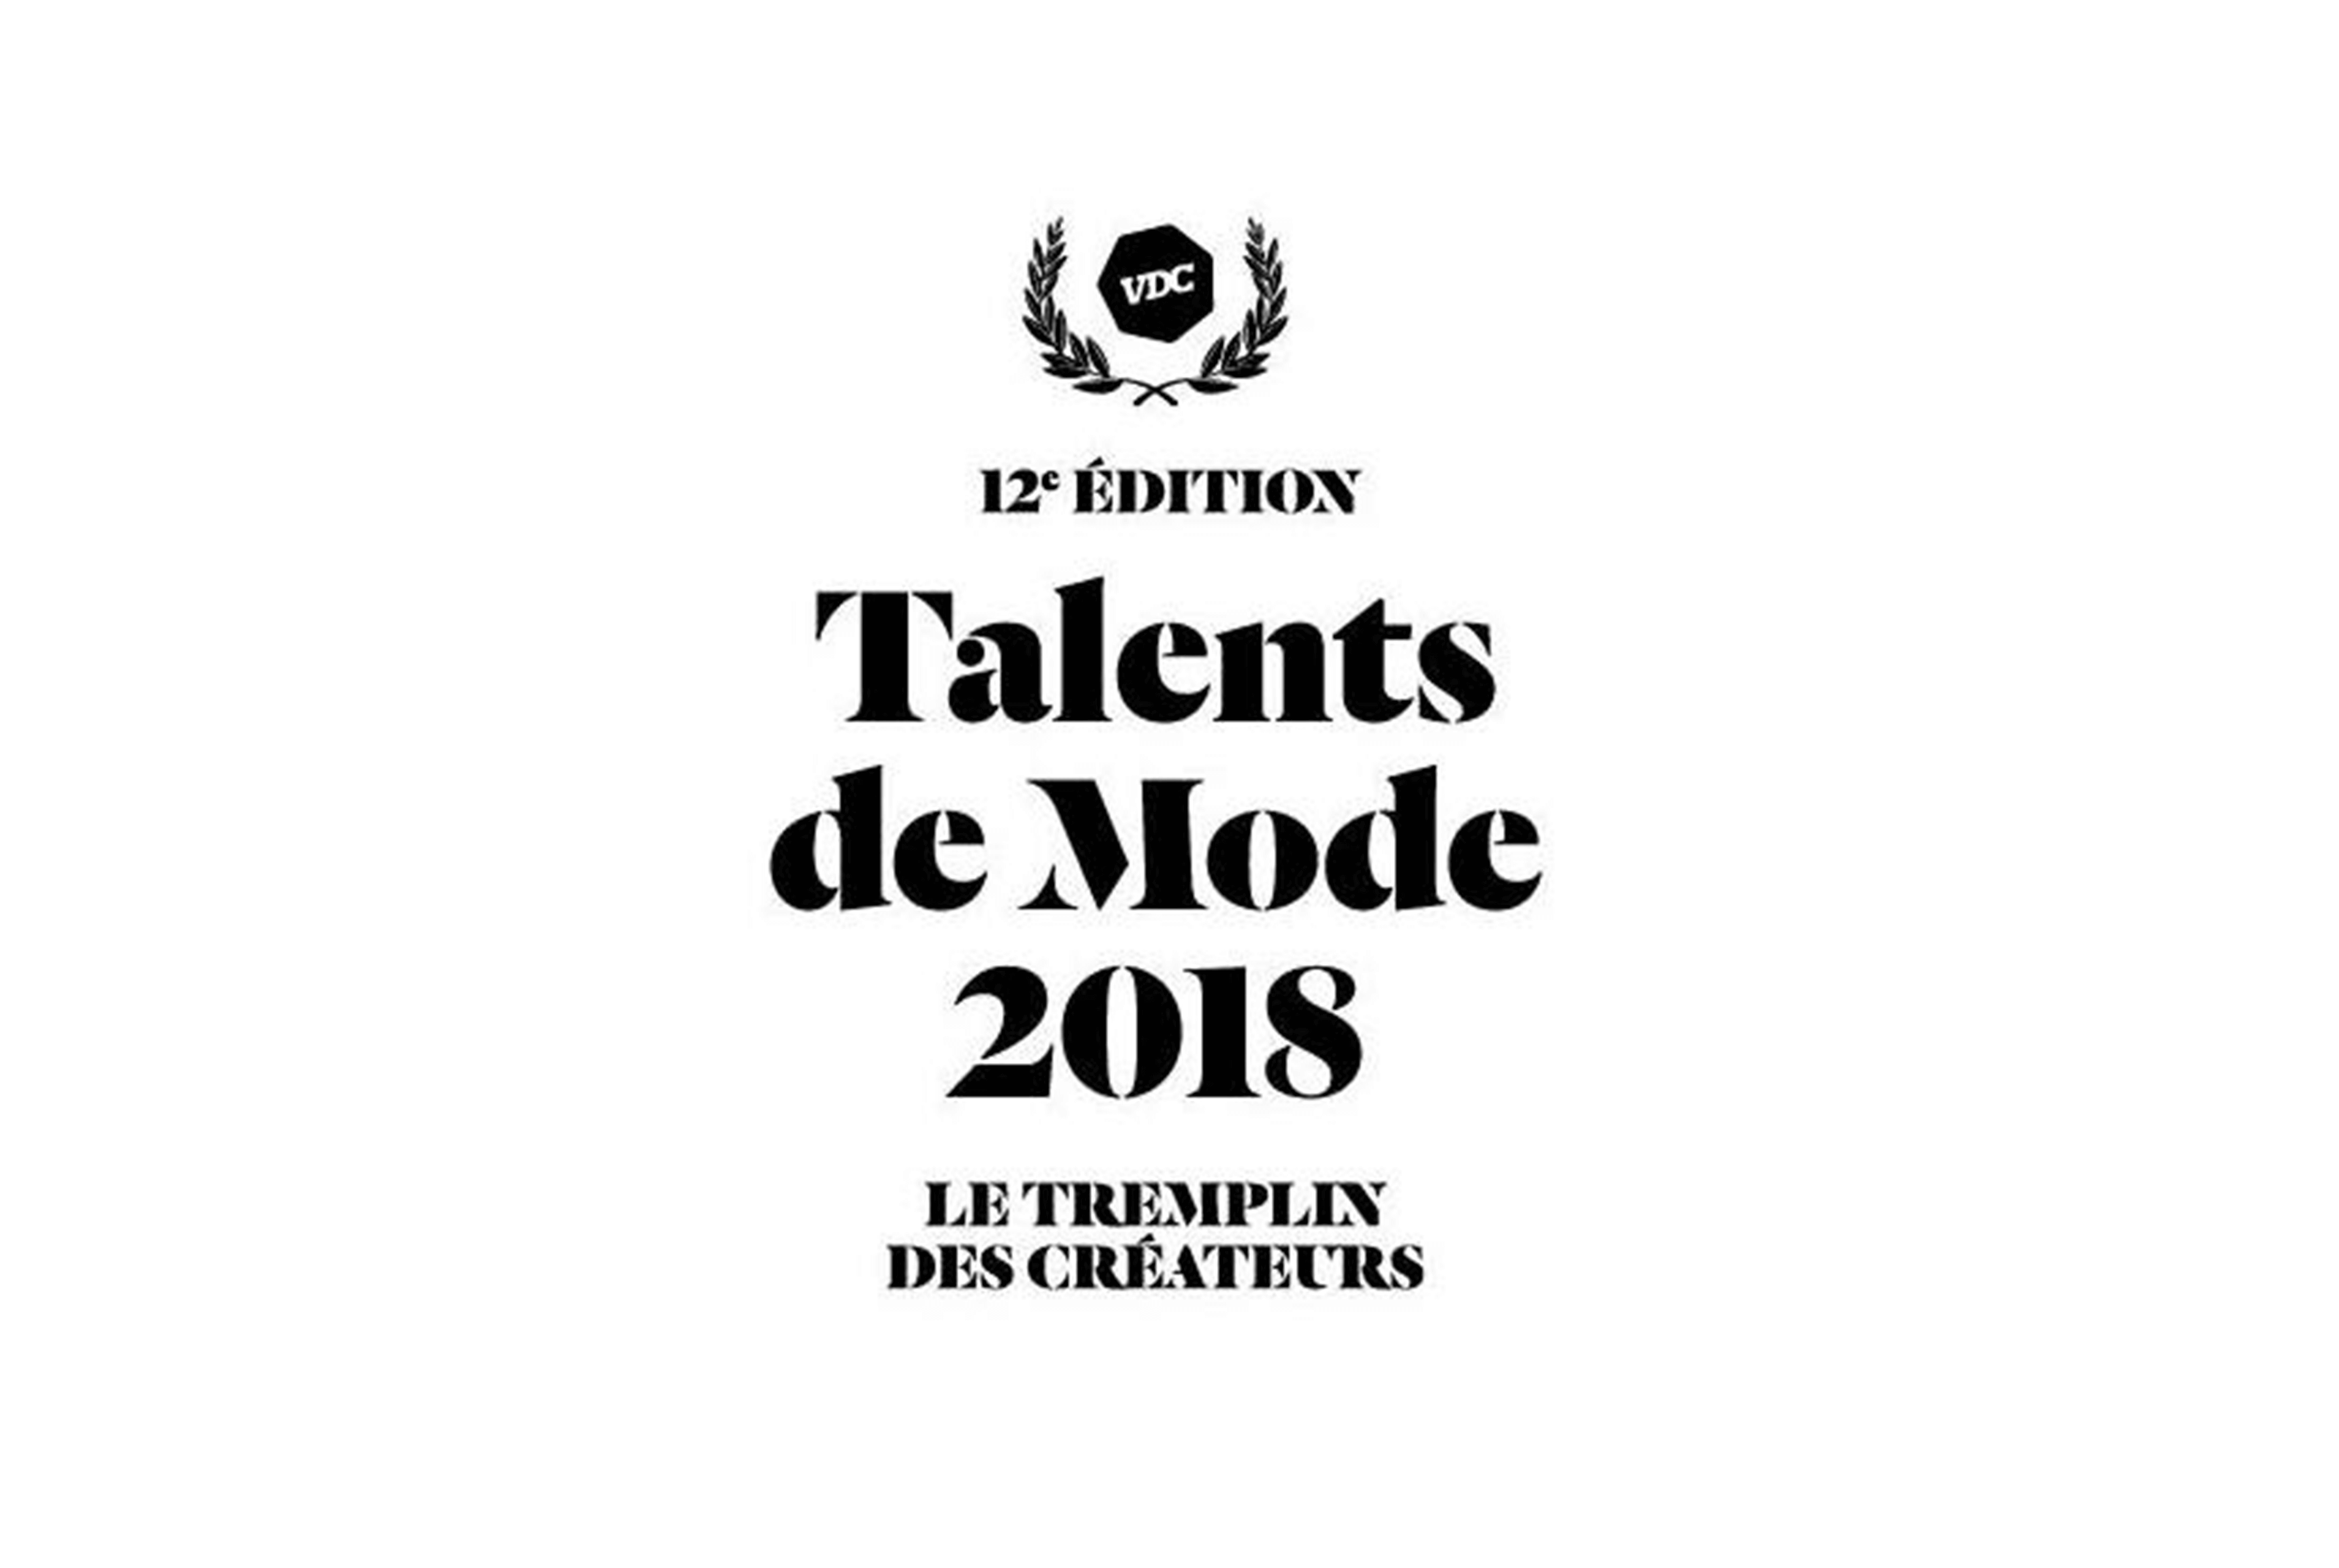 The winners of Talents de Mode 2018 contests